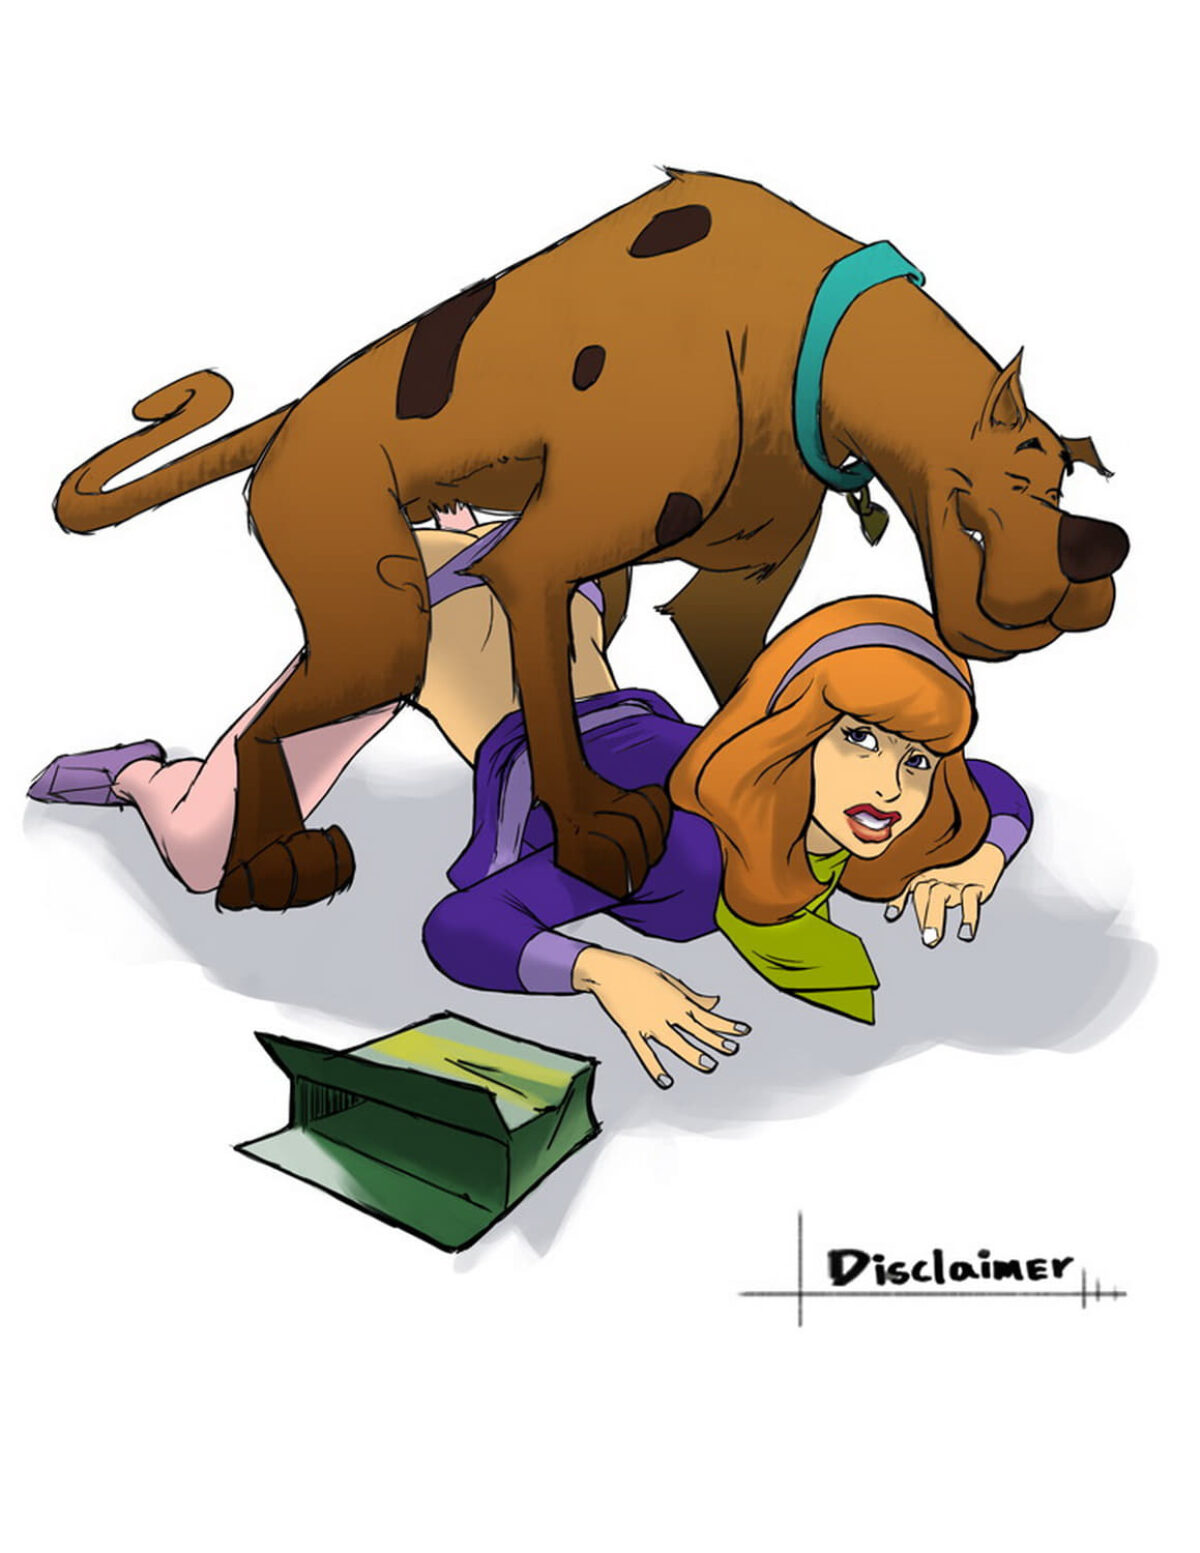 Daphne Cartoon Porn - Daphne Blake and Scooby Penis Sex Anal Sex Zoo Doggy Style > Your Cartoon  Porn